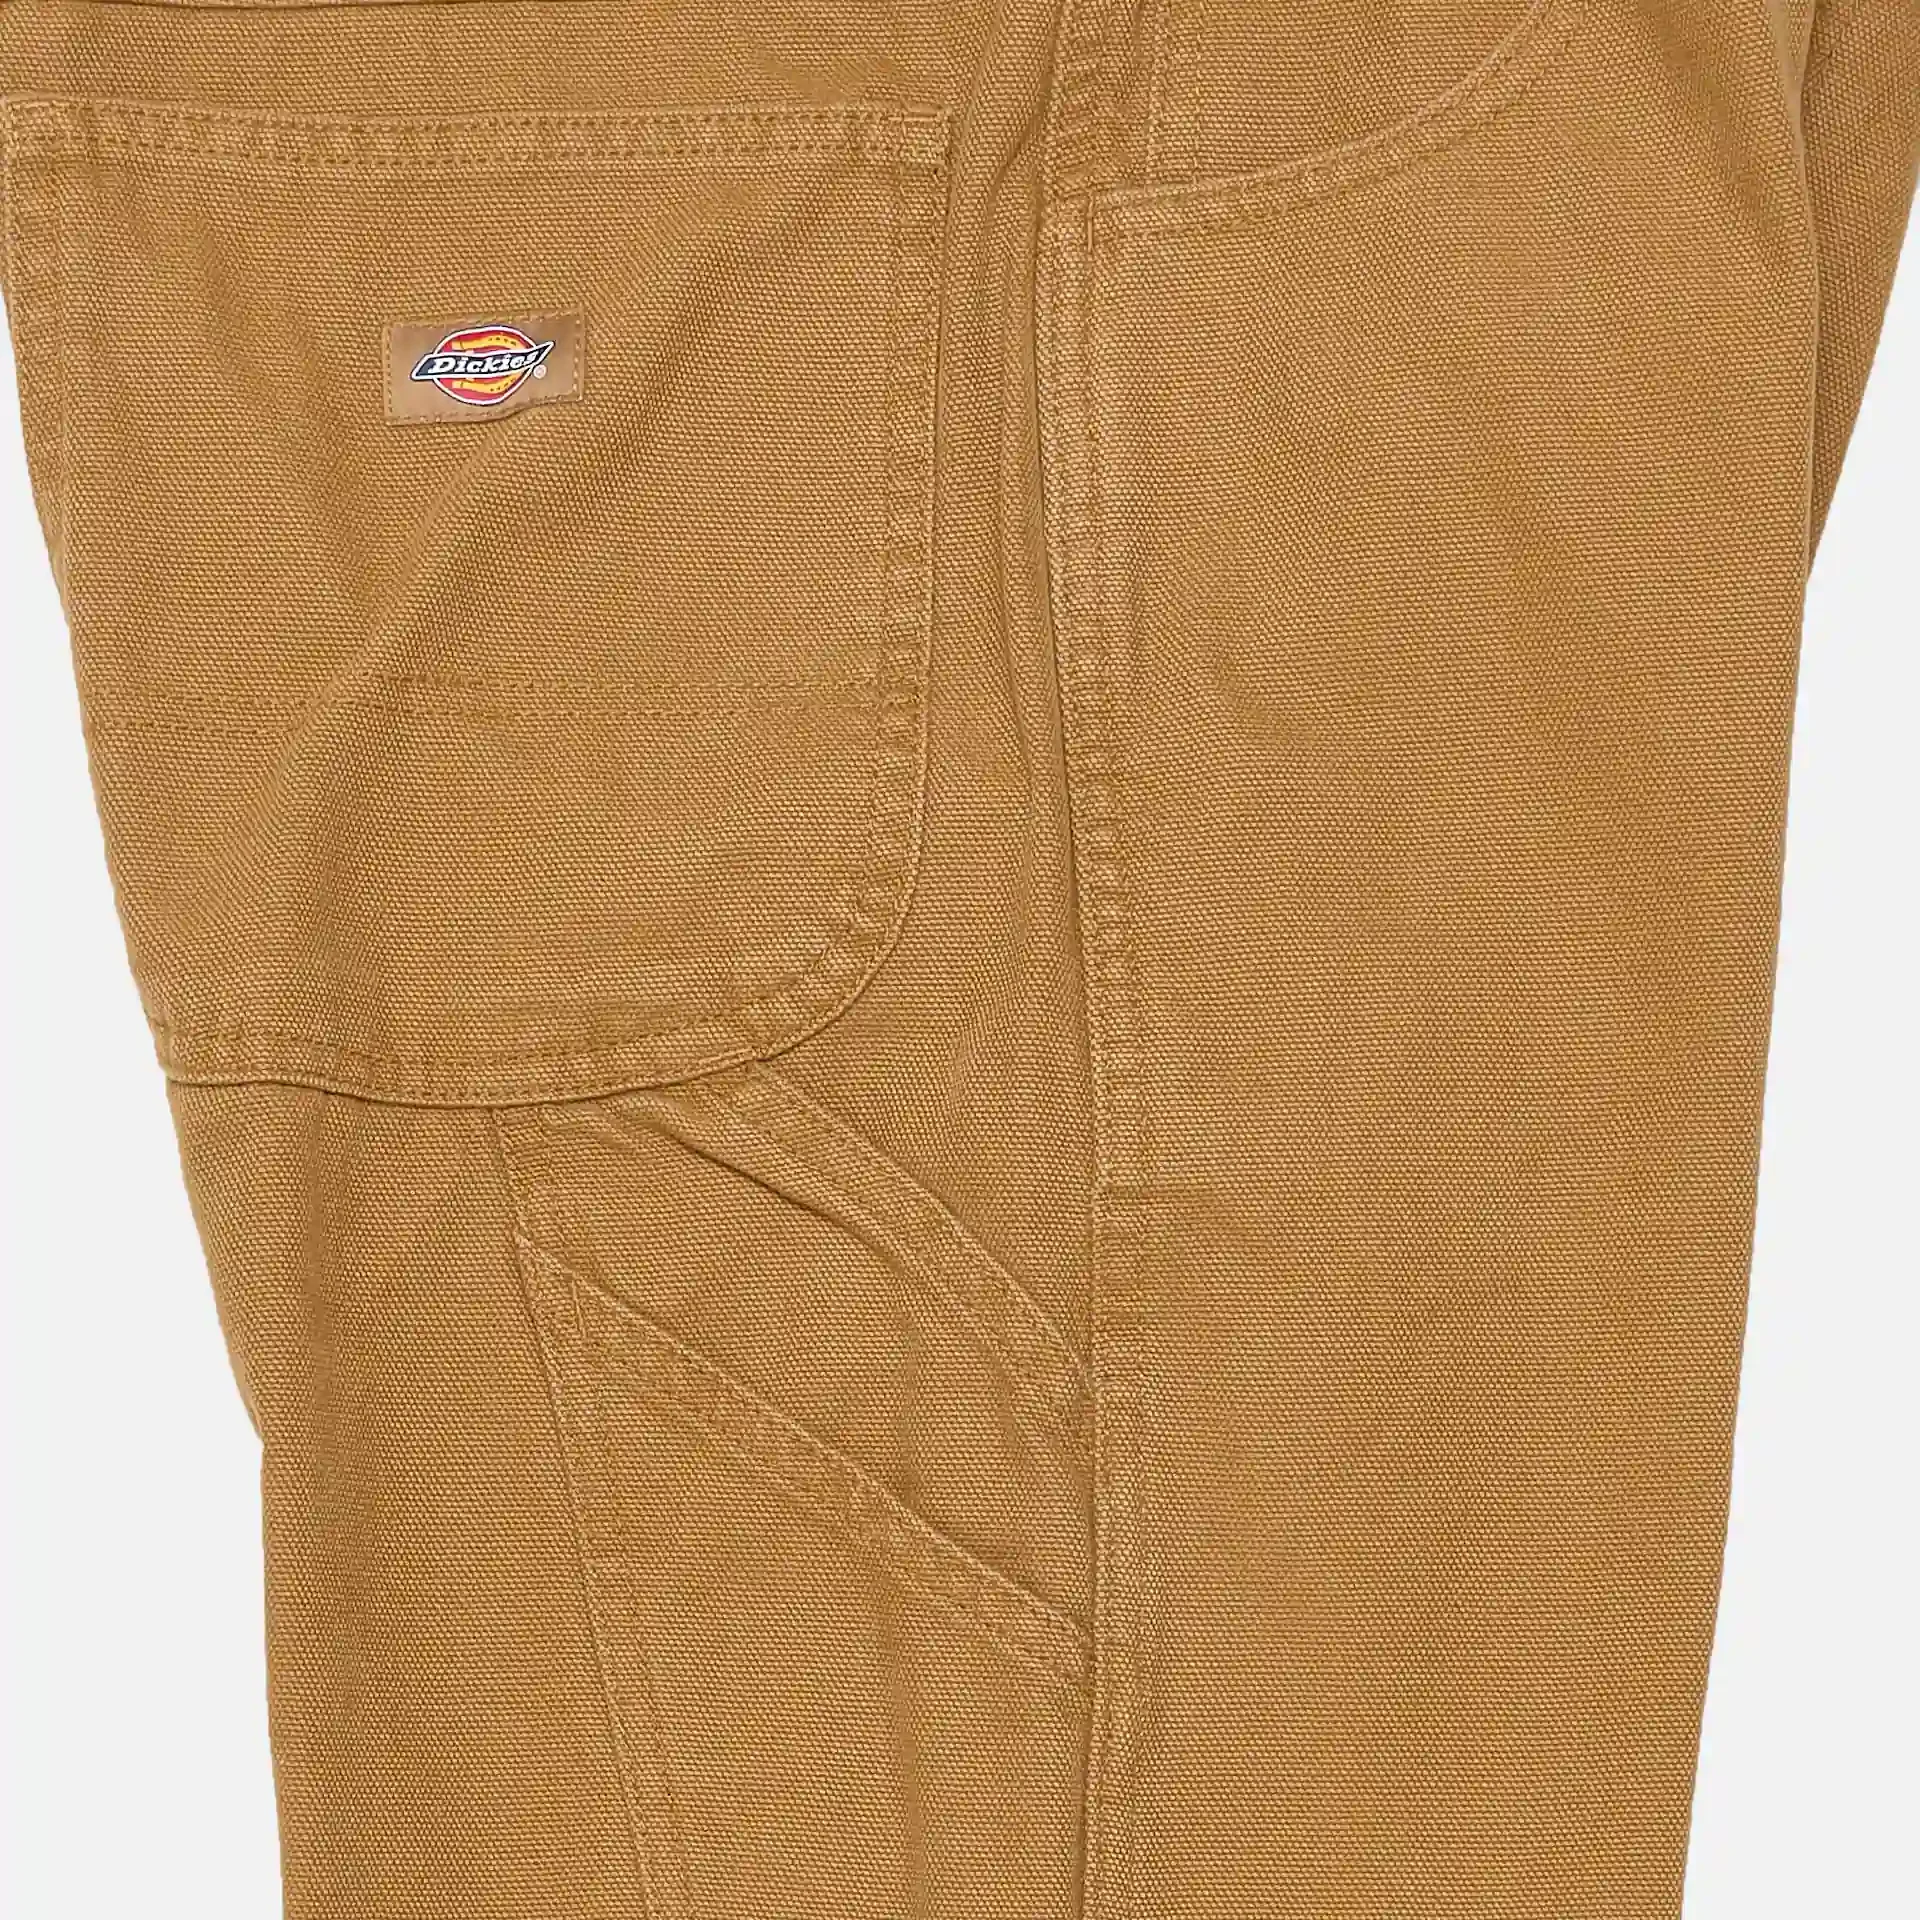 Dickies Duck Canvas Carpenter Chino Pants Stone Washed Brown Duck